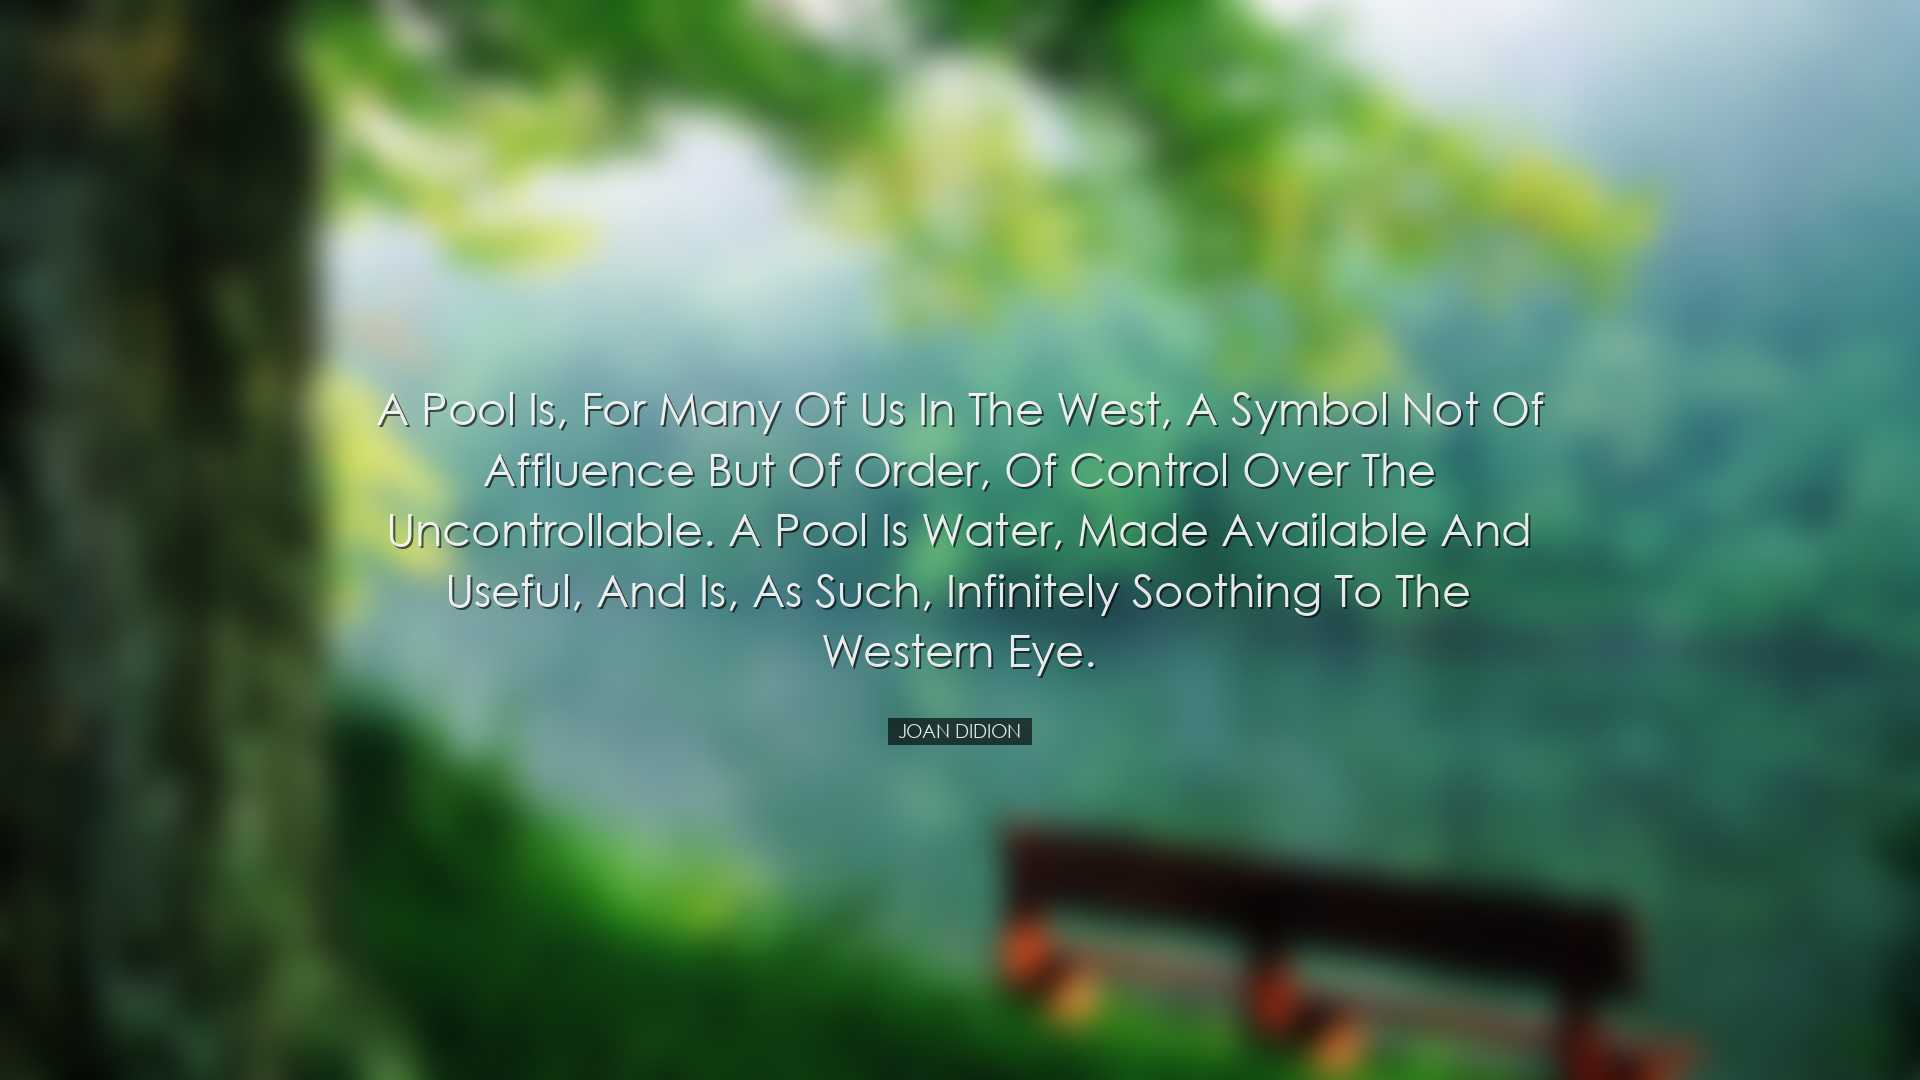 A pool is, for many of us in the West, a symbol not of affluence b